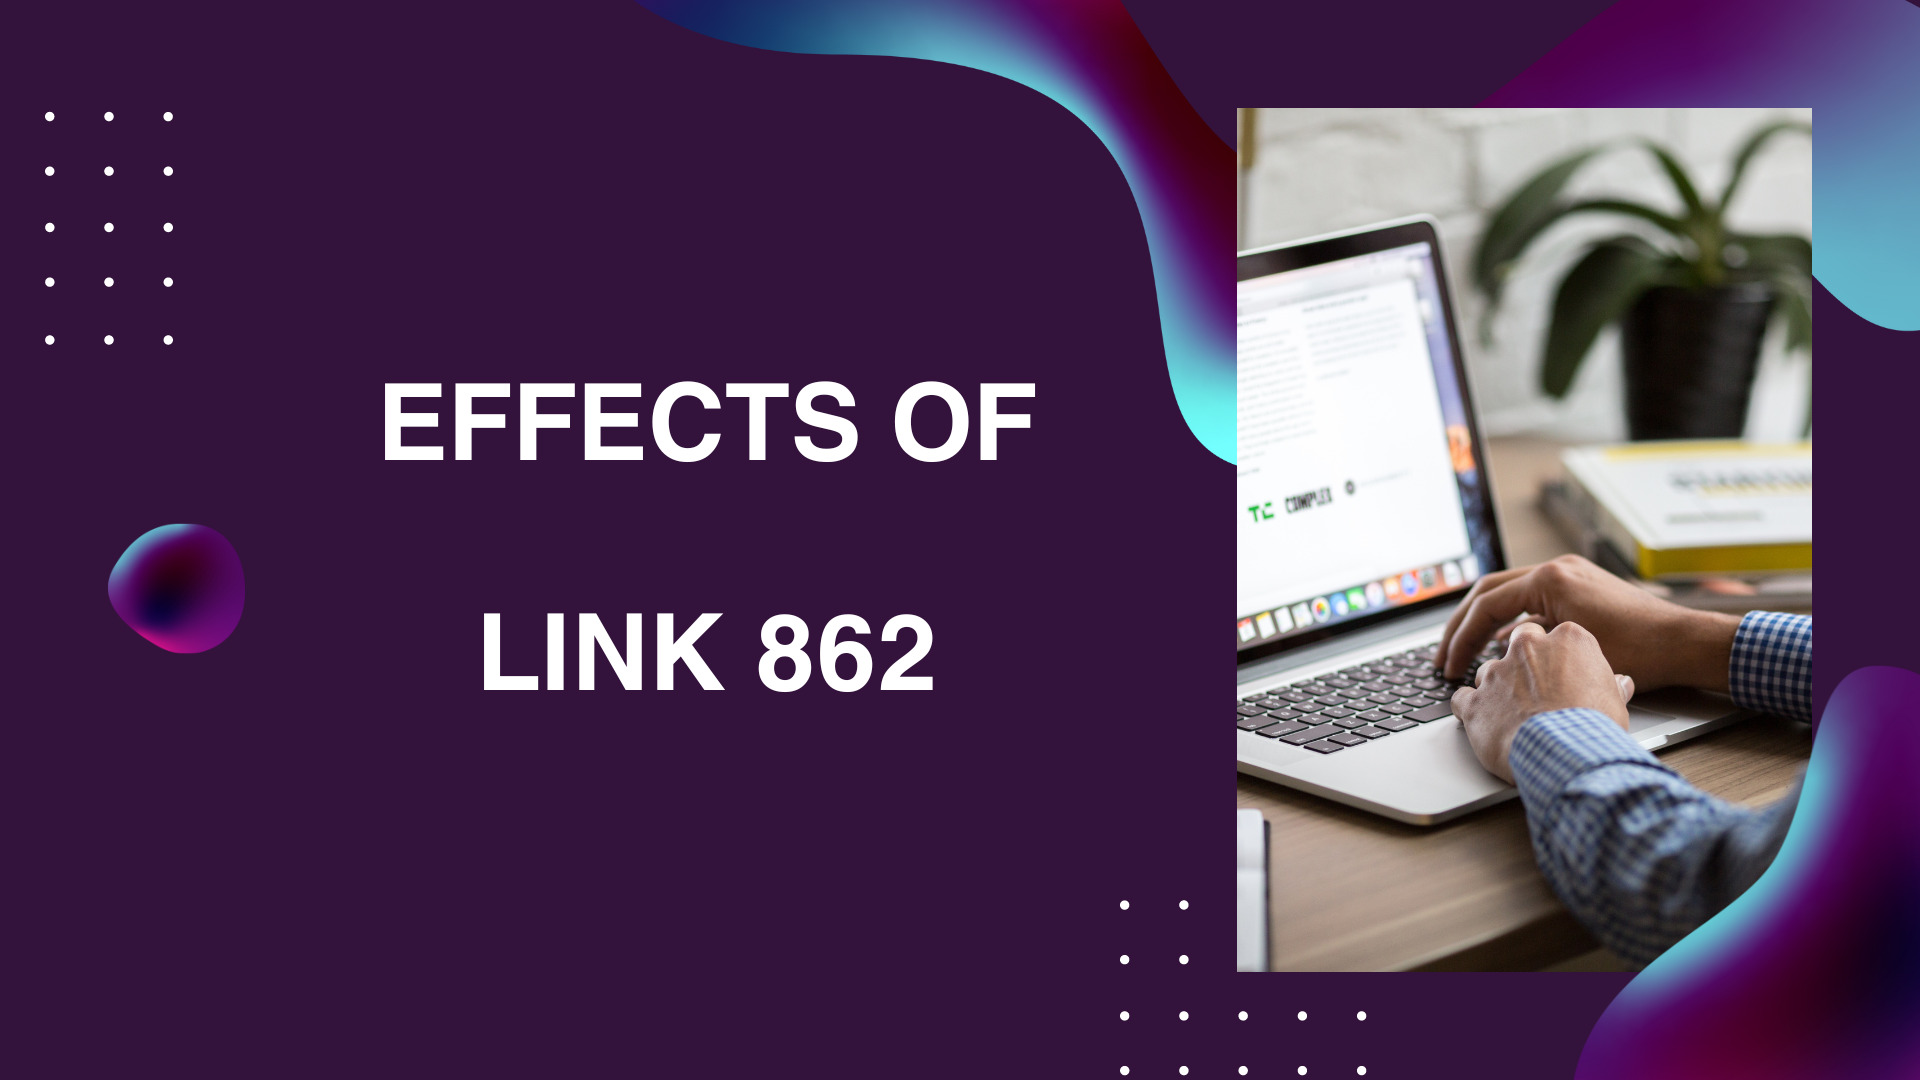 Effects of Link 862